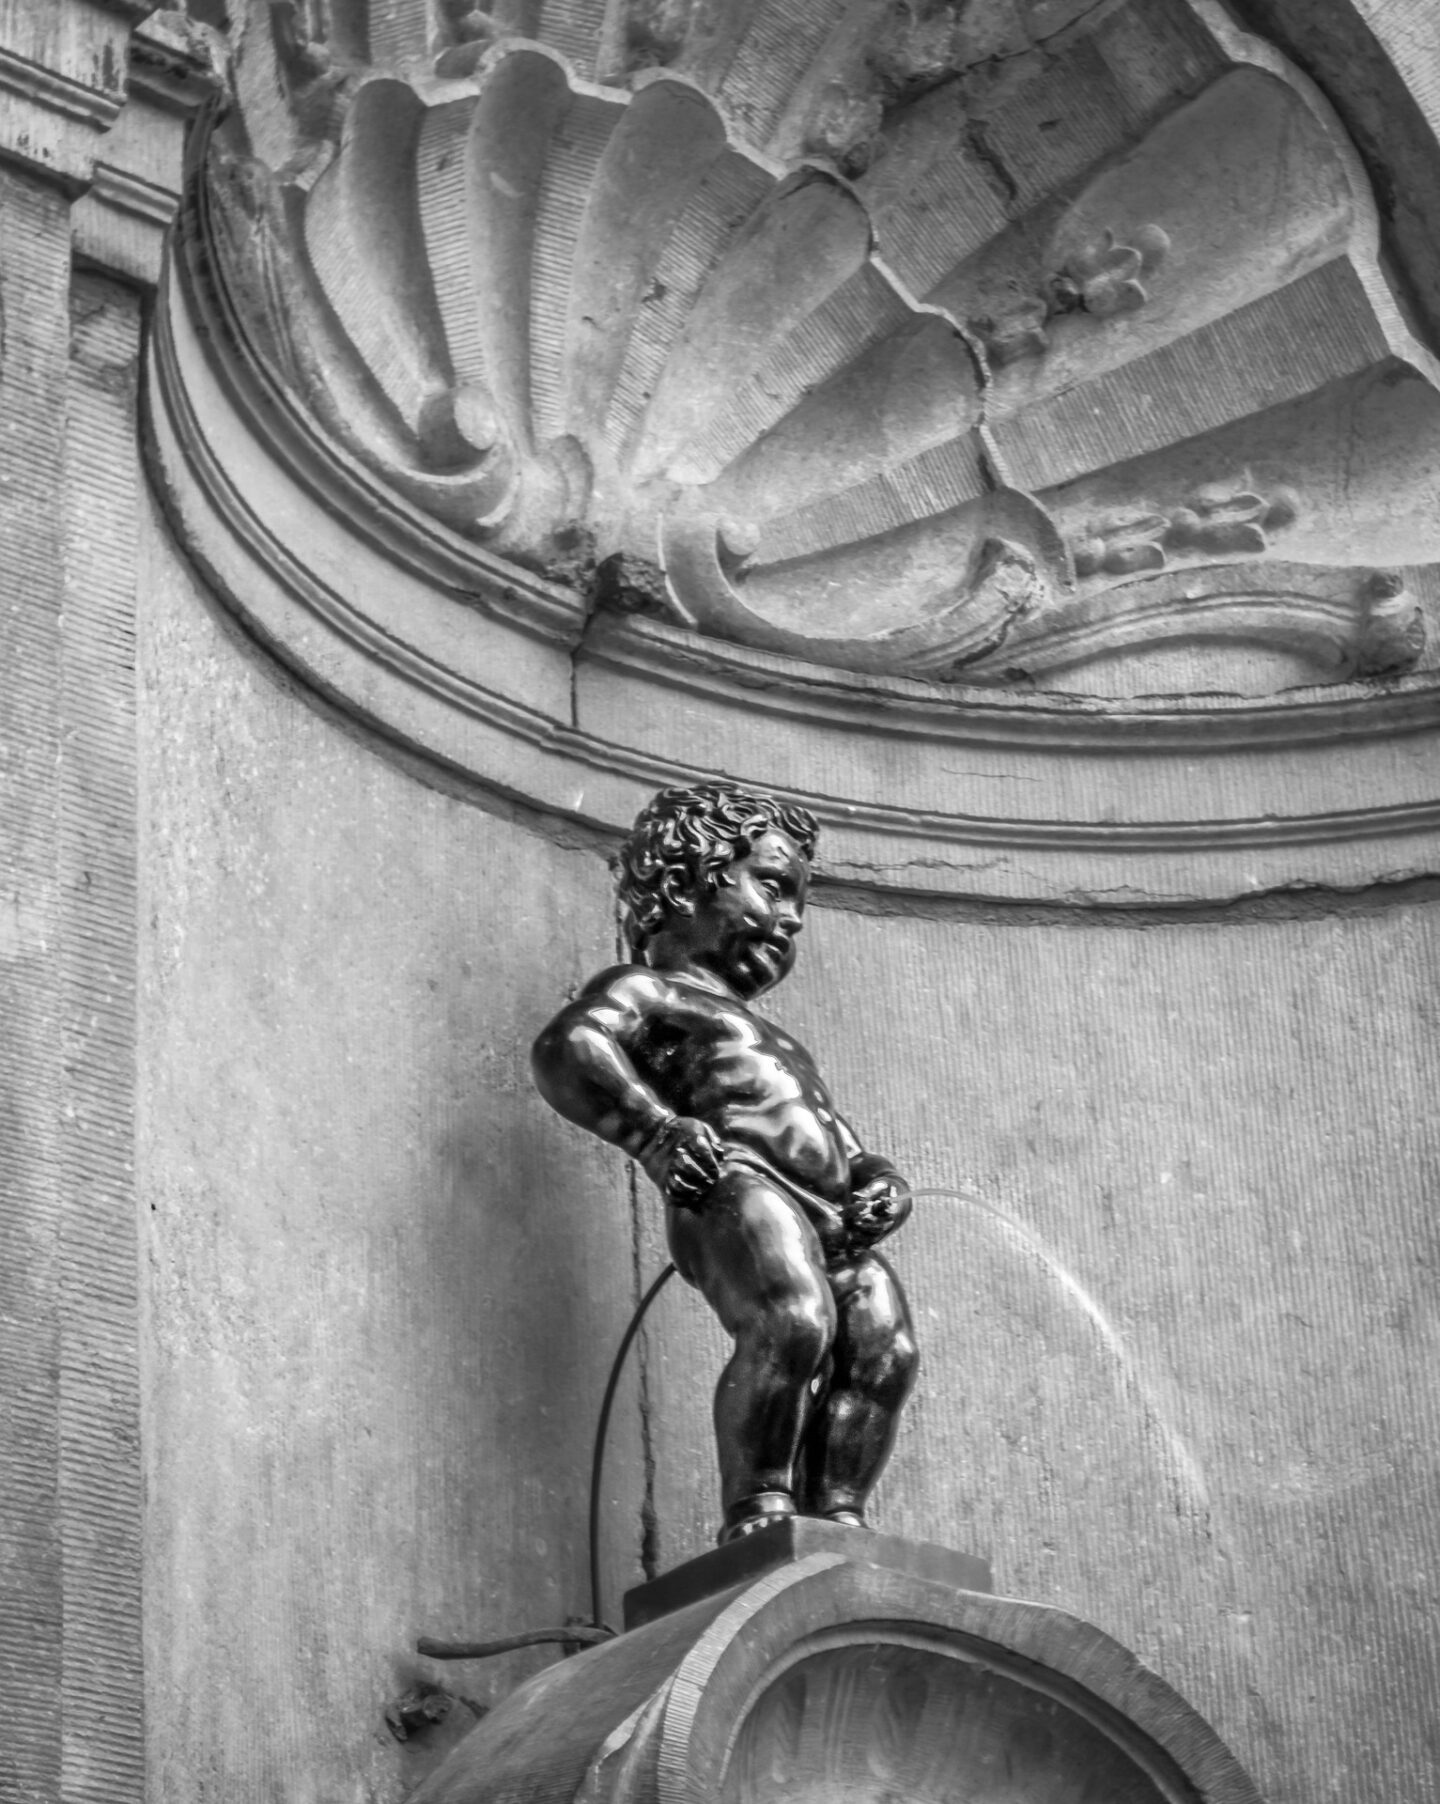 The Manneken Pis in Brussels
Perfect 2 day Brussels itinerary